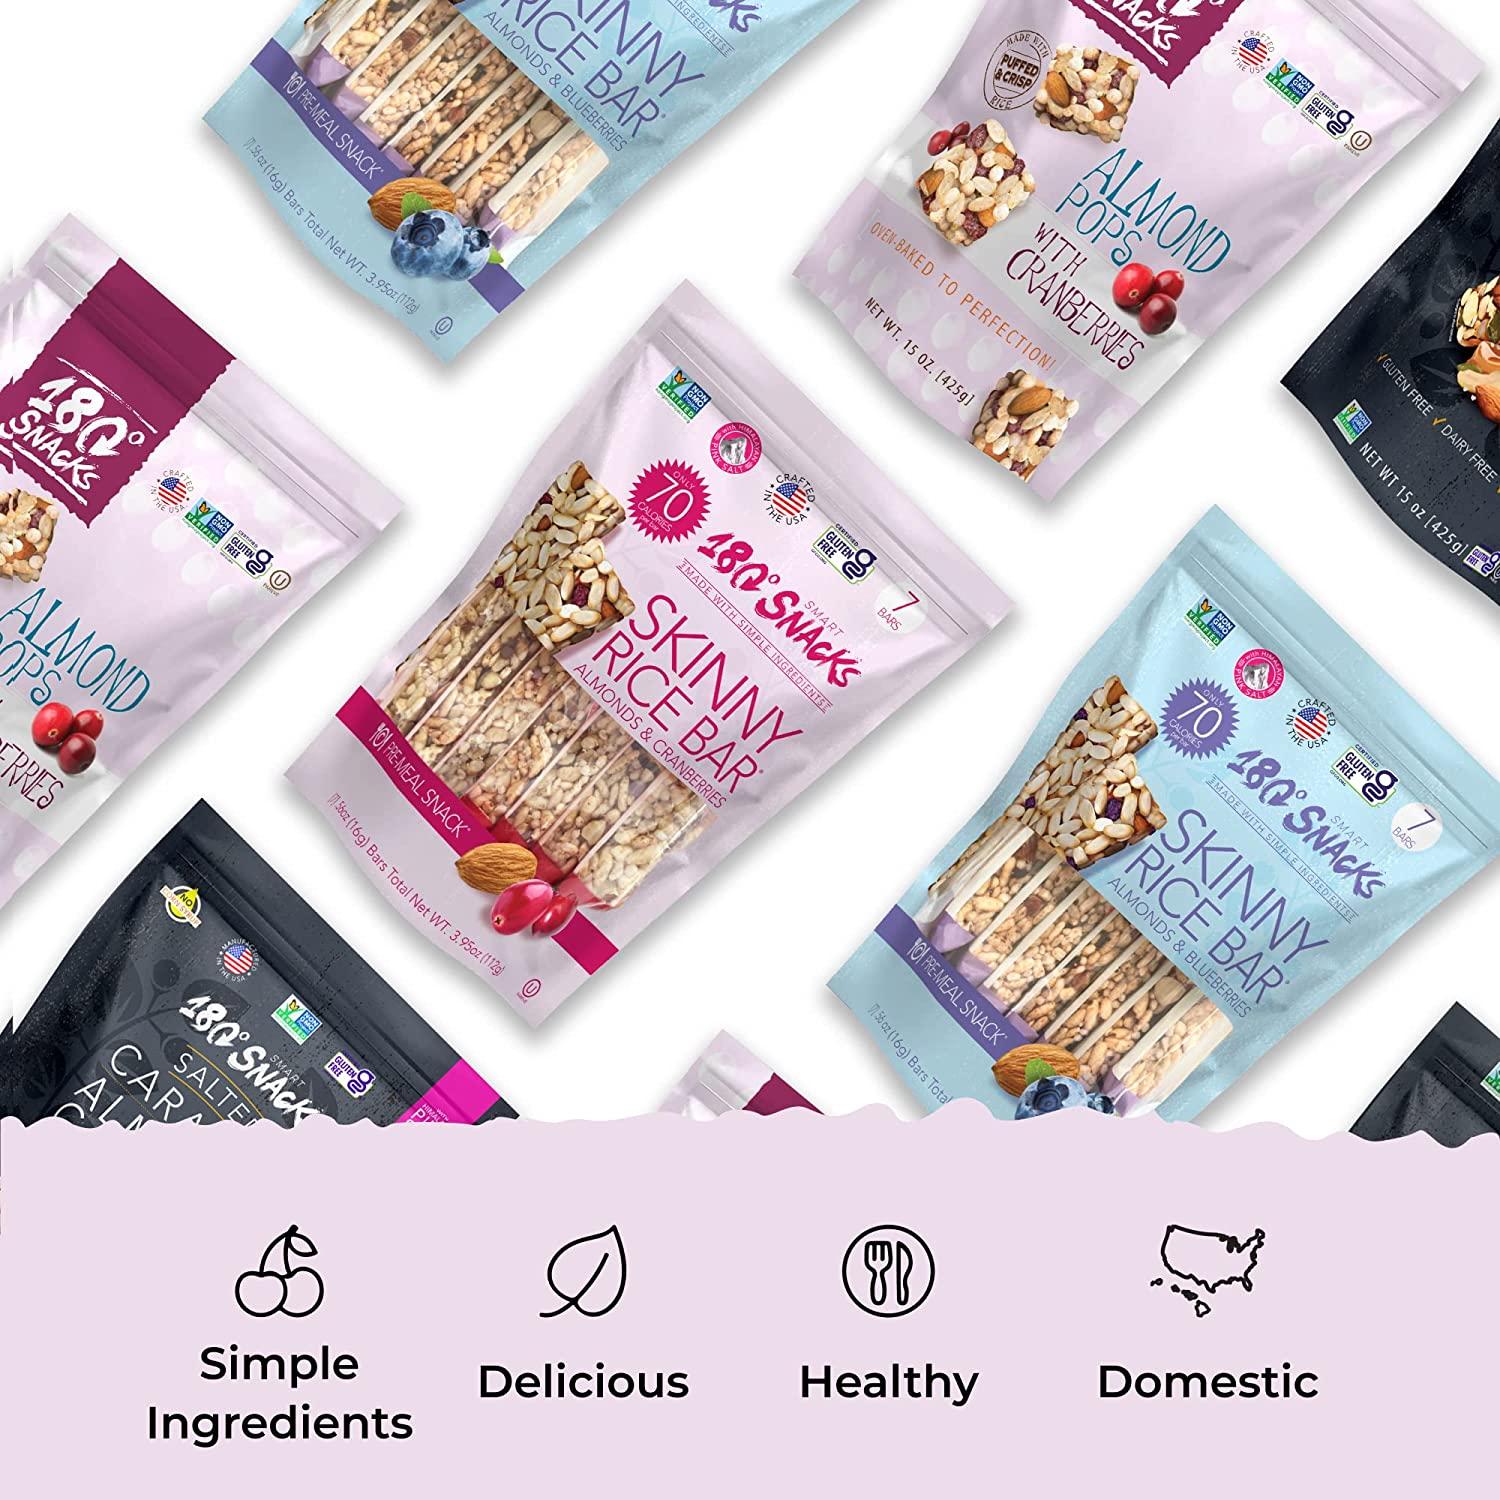 180 Snack Skinny Rice Bar Almonds & Cranberries Review 